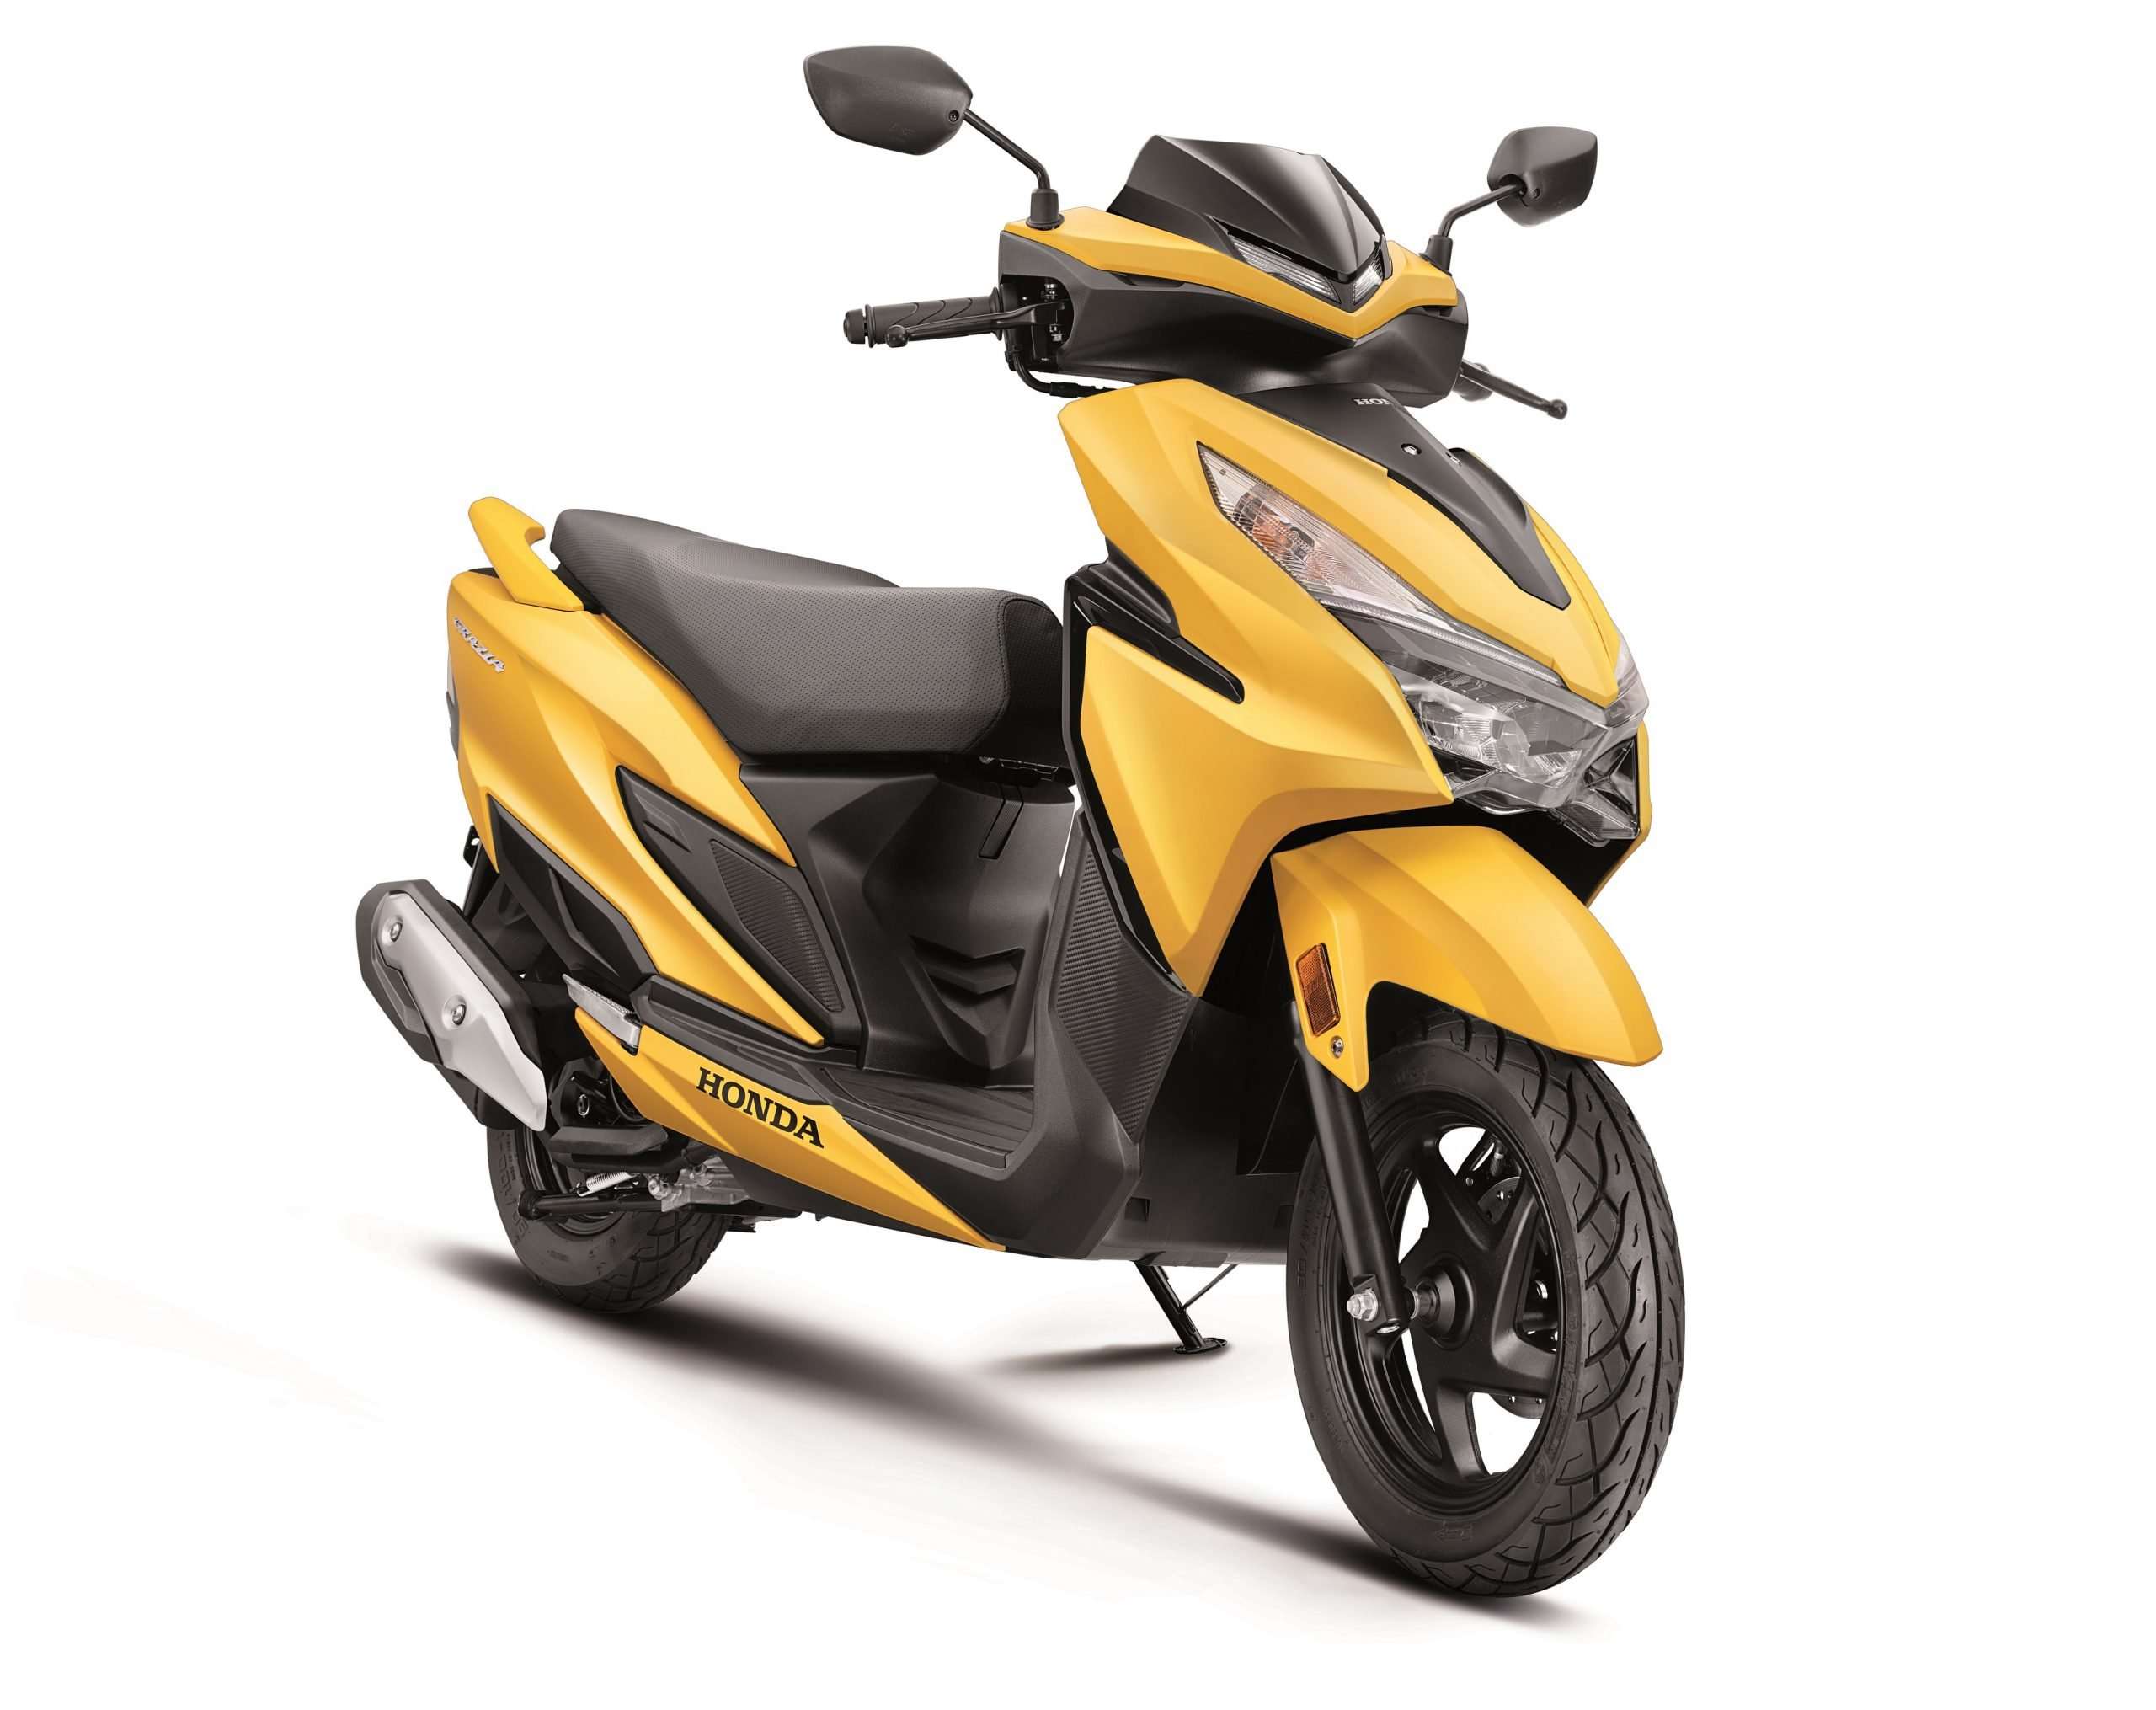 Honda Grazia BS6 launched in India